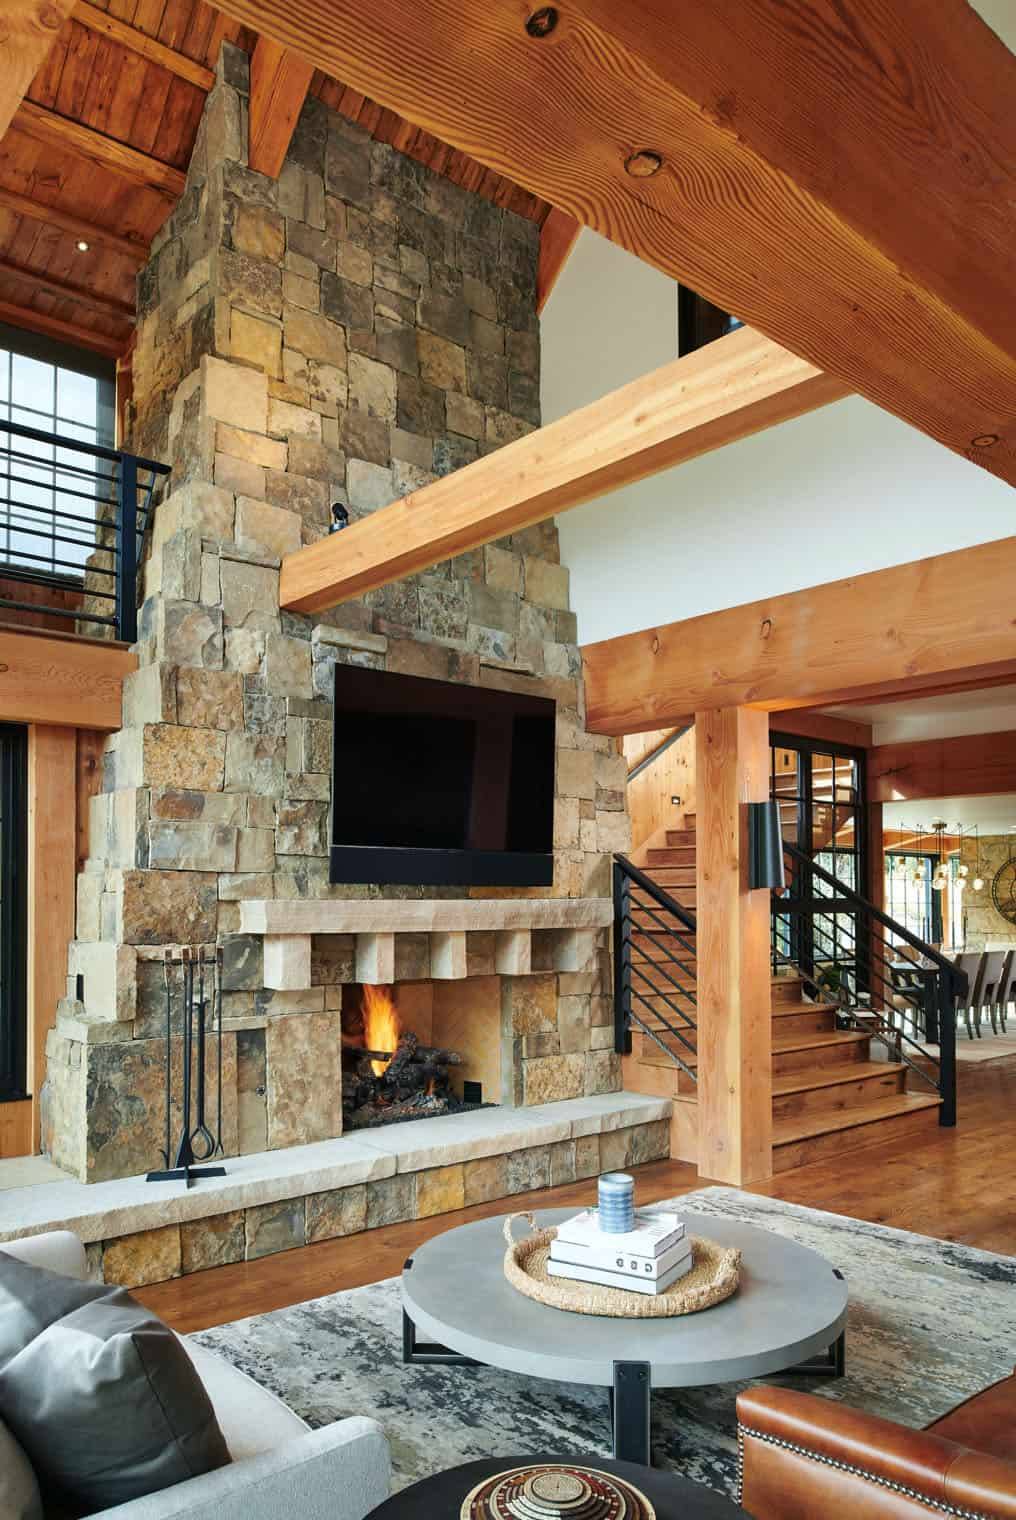 04 The living room shows off a cool two-story stone fireplace, and that is a centerpiece